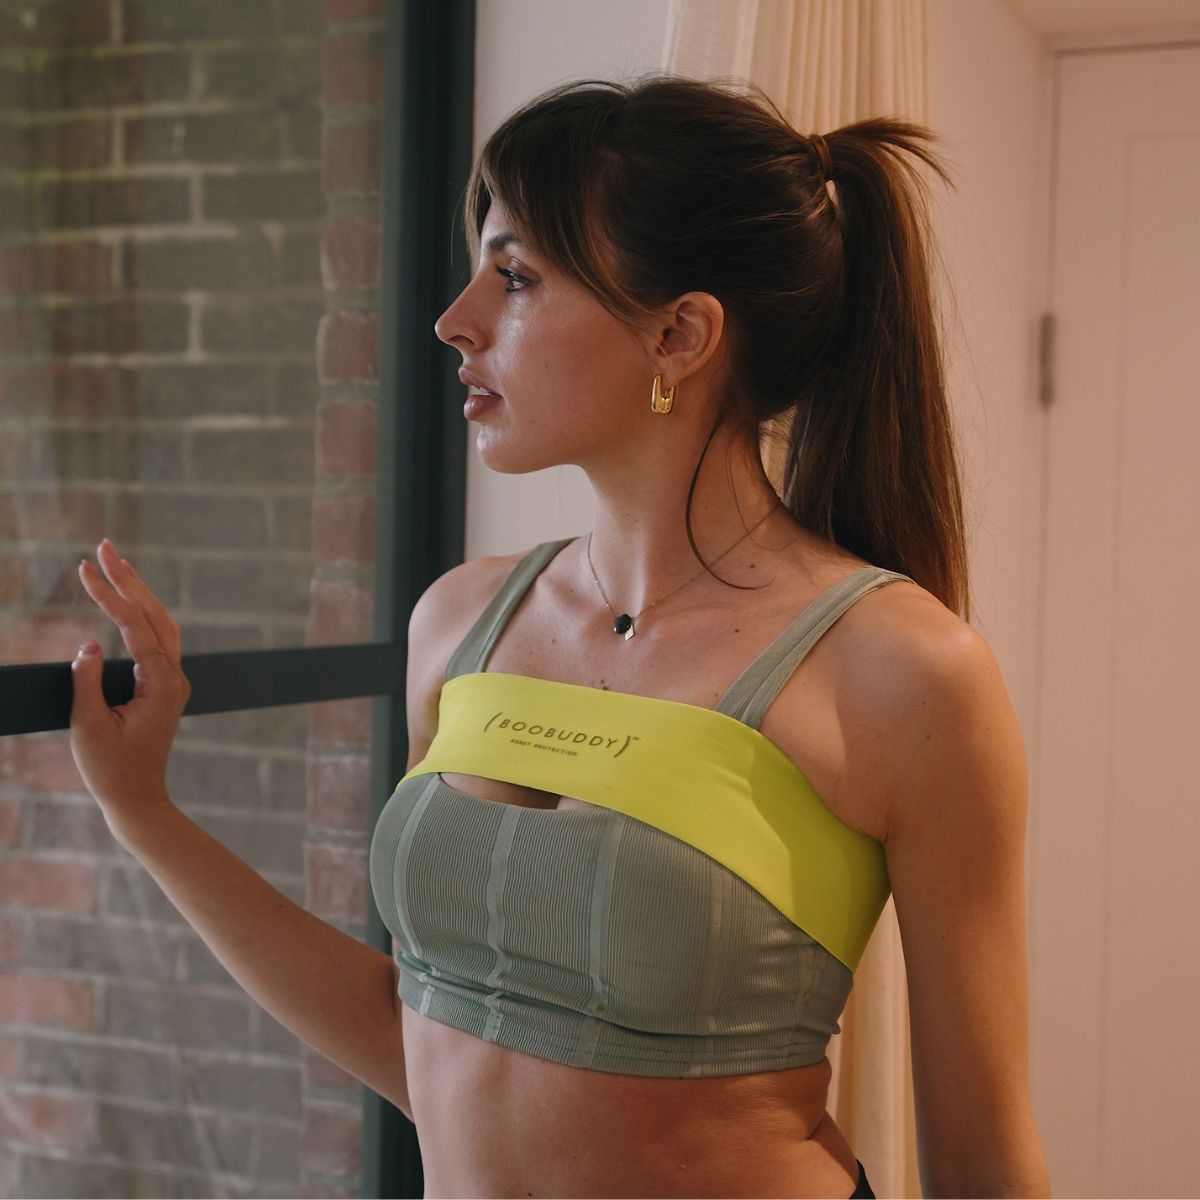 The Boobuddy Is The Exercise Band You Didn't Know You Needed But Definitely  Do